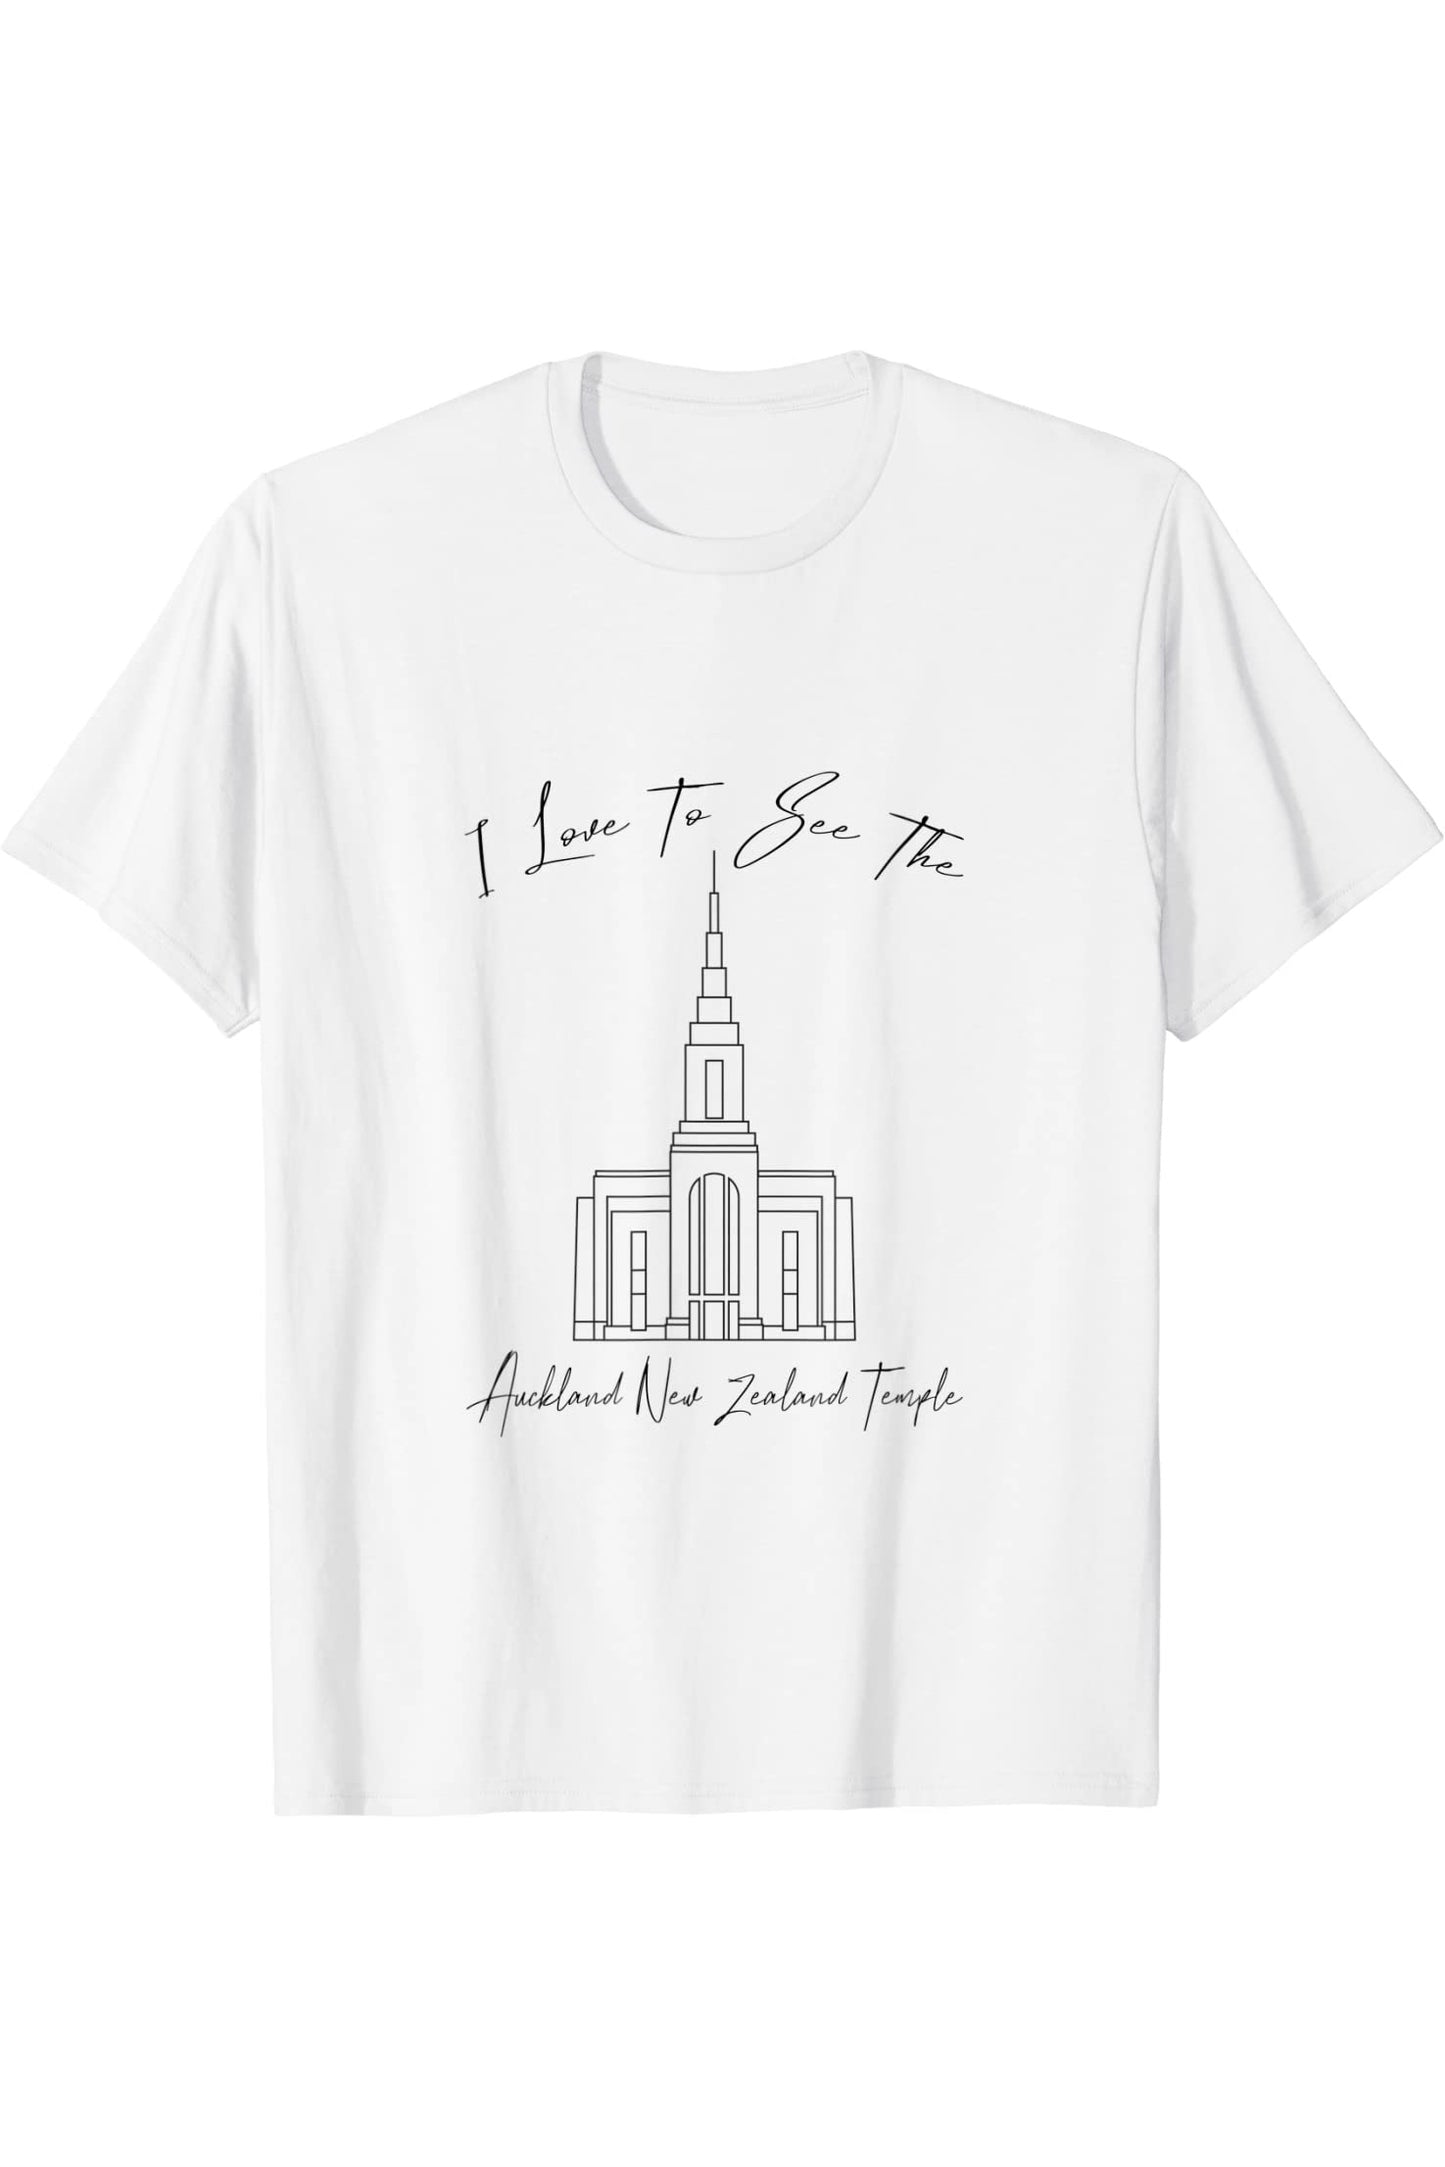 Auckland New Zealand Temple T-Shirt - Calligraphy Style (English) US